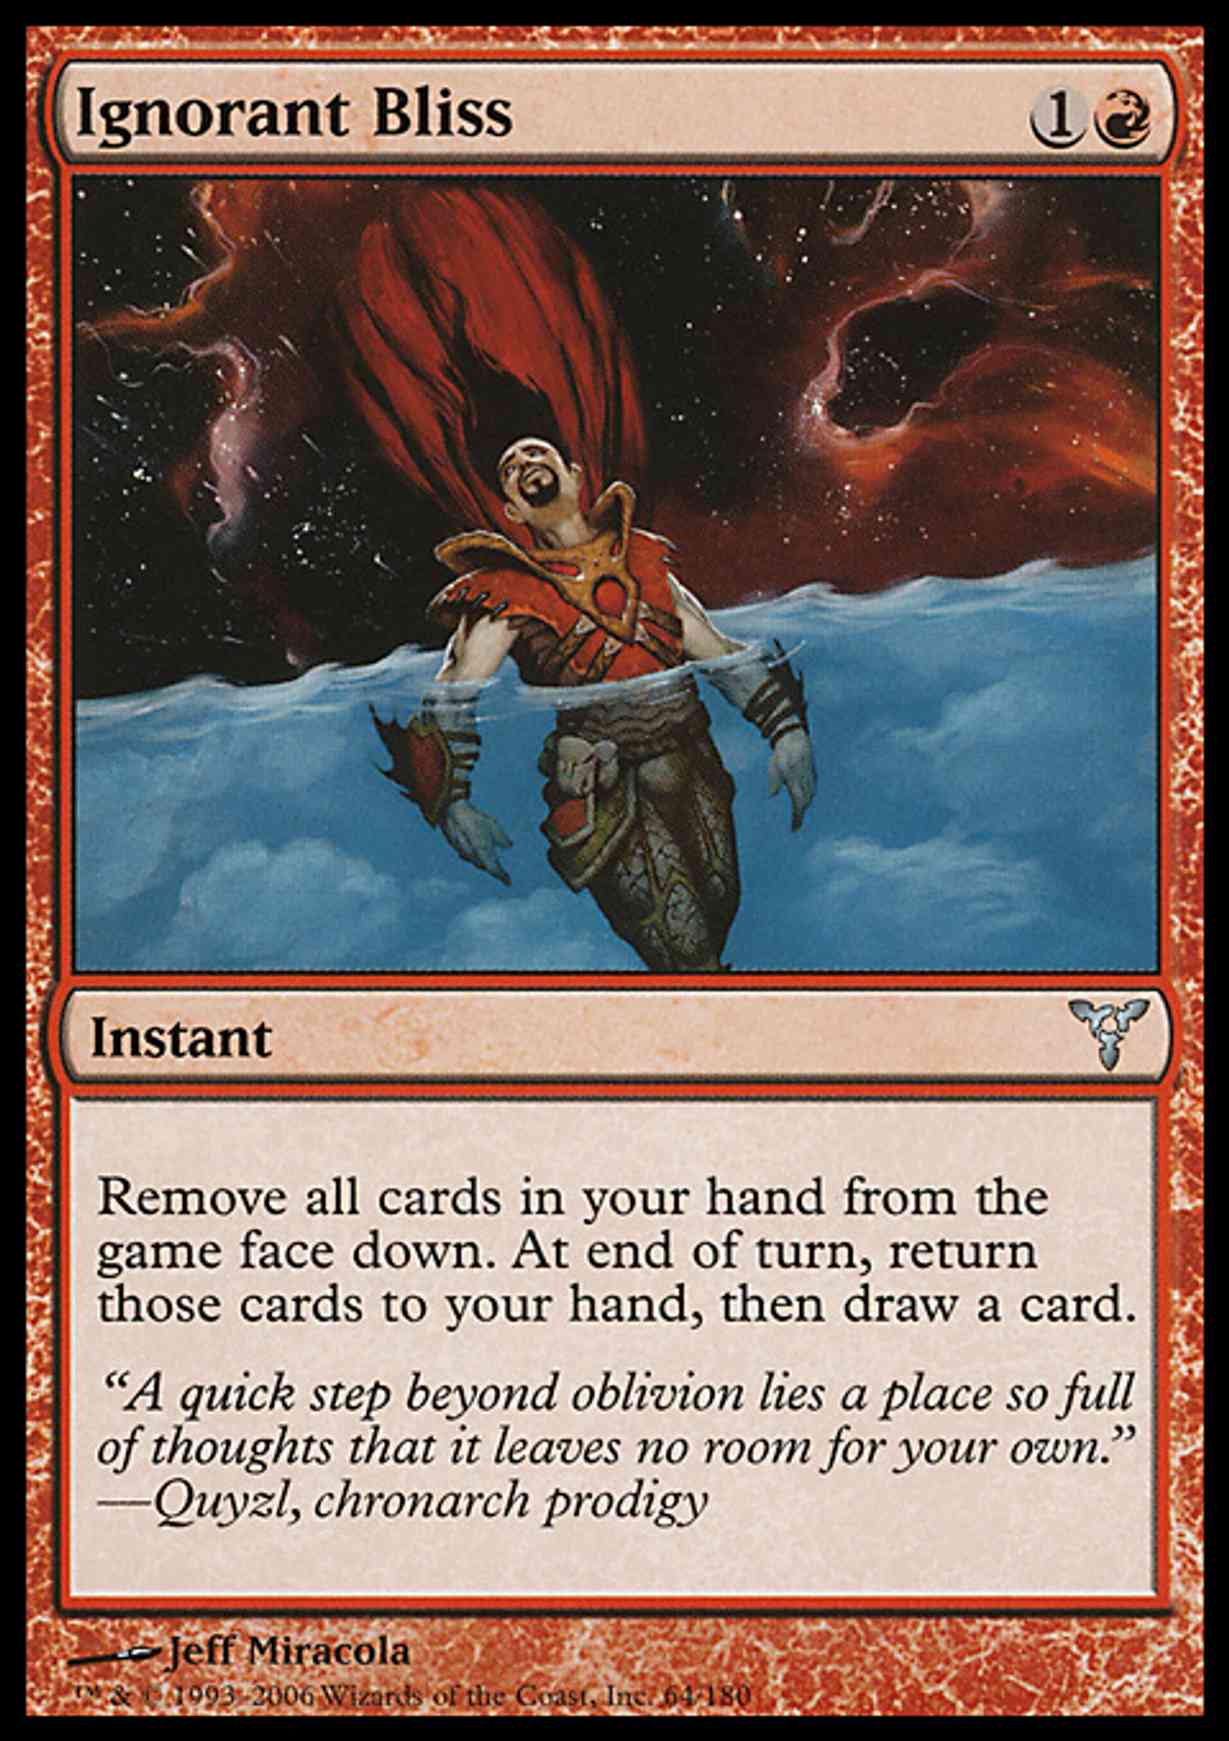 Ignorant Bliss magic card front